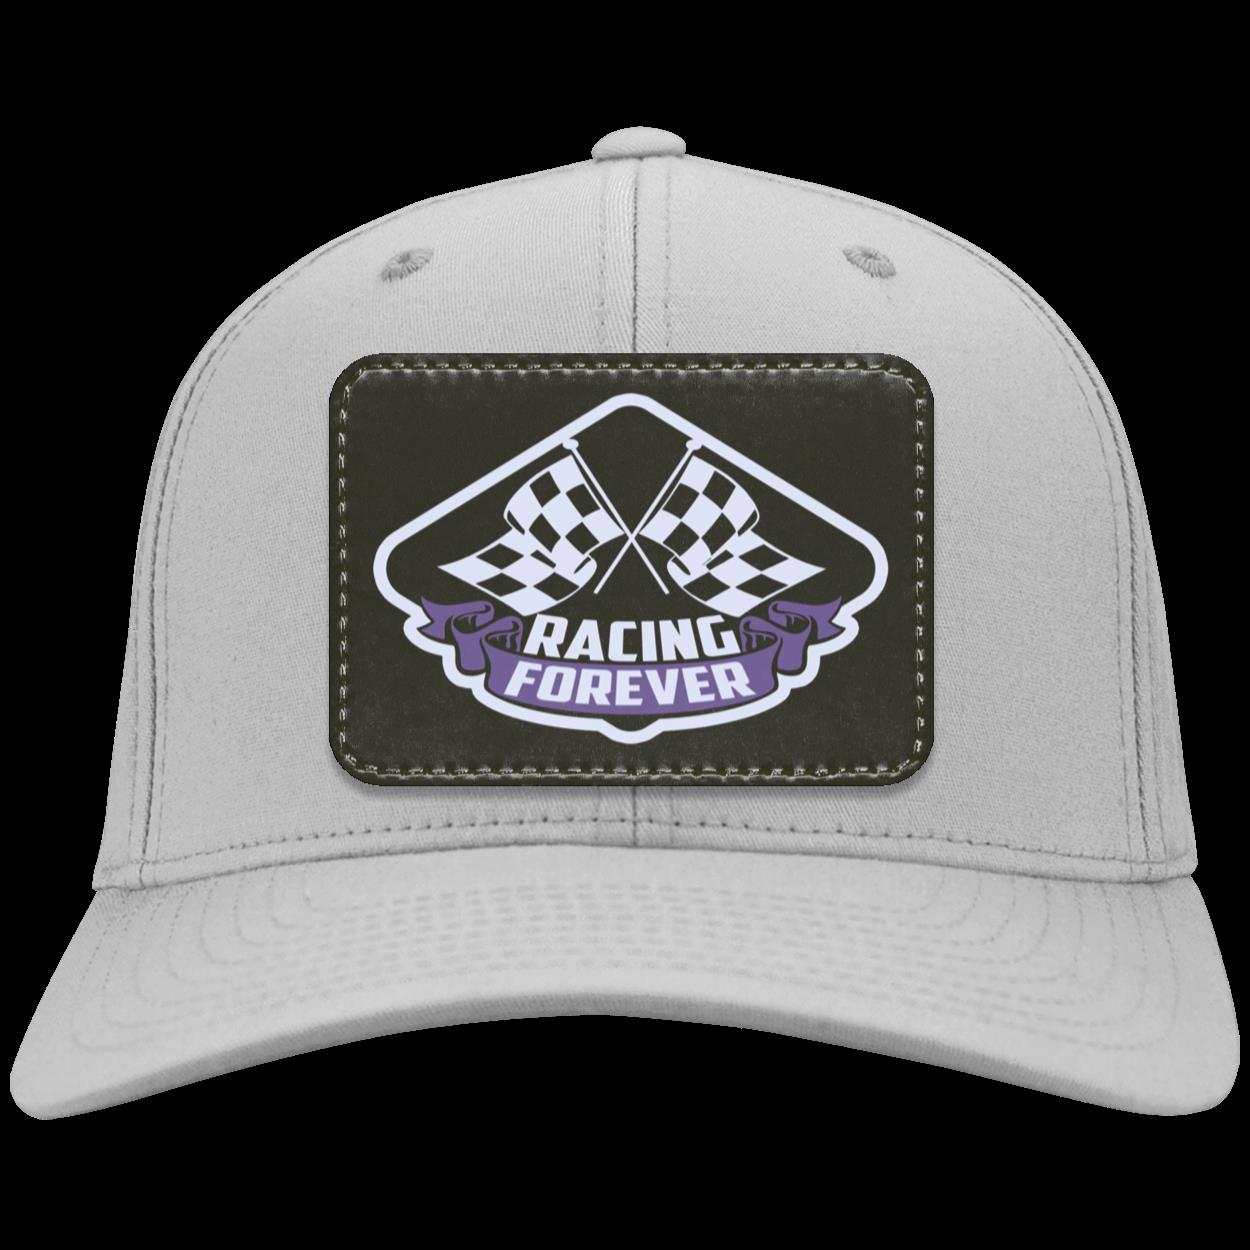 Racing Forever Patched Twill Cap V5